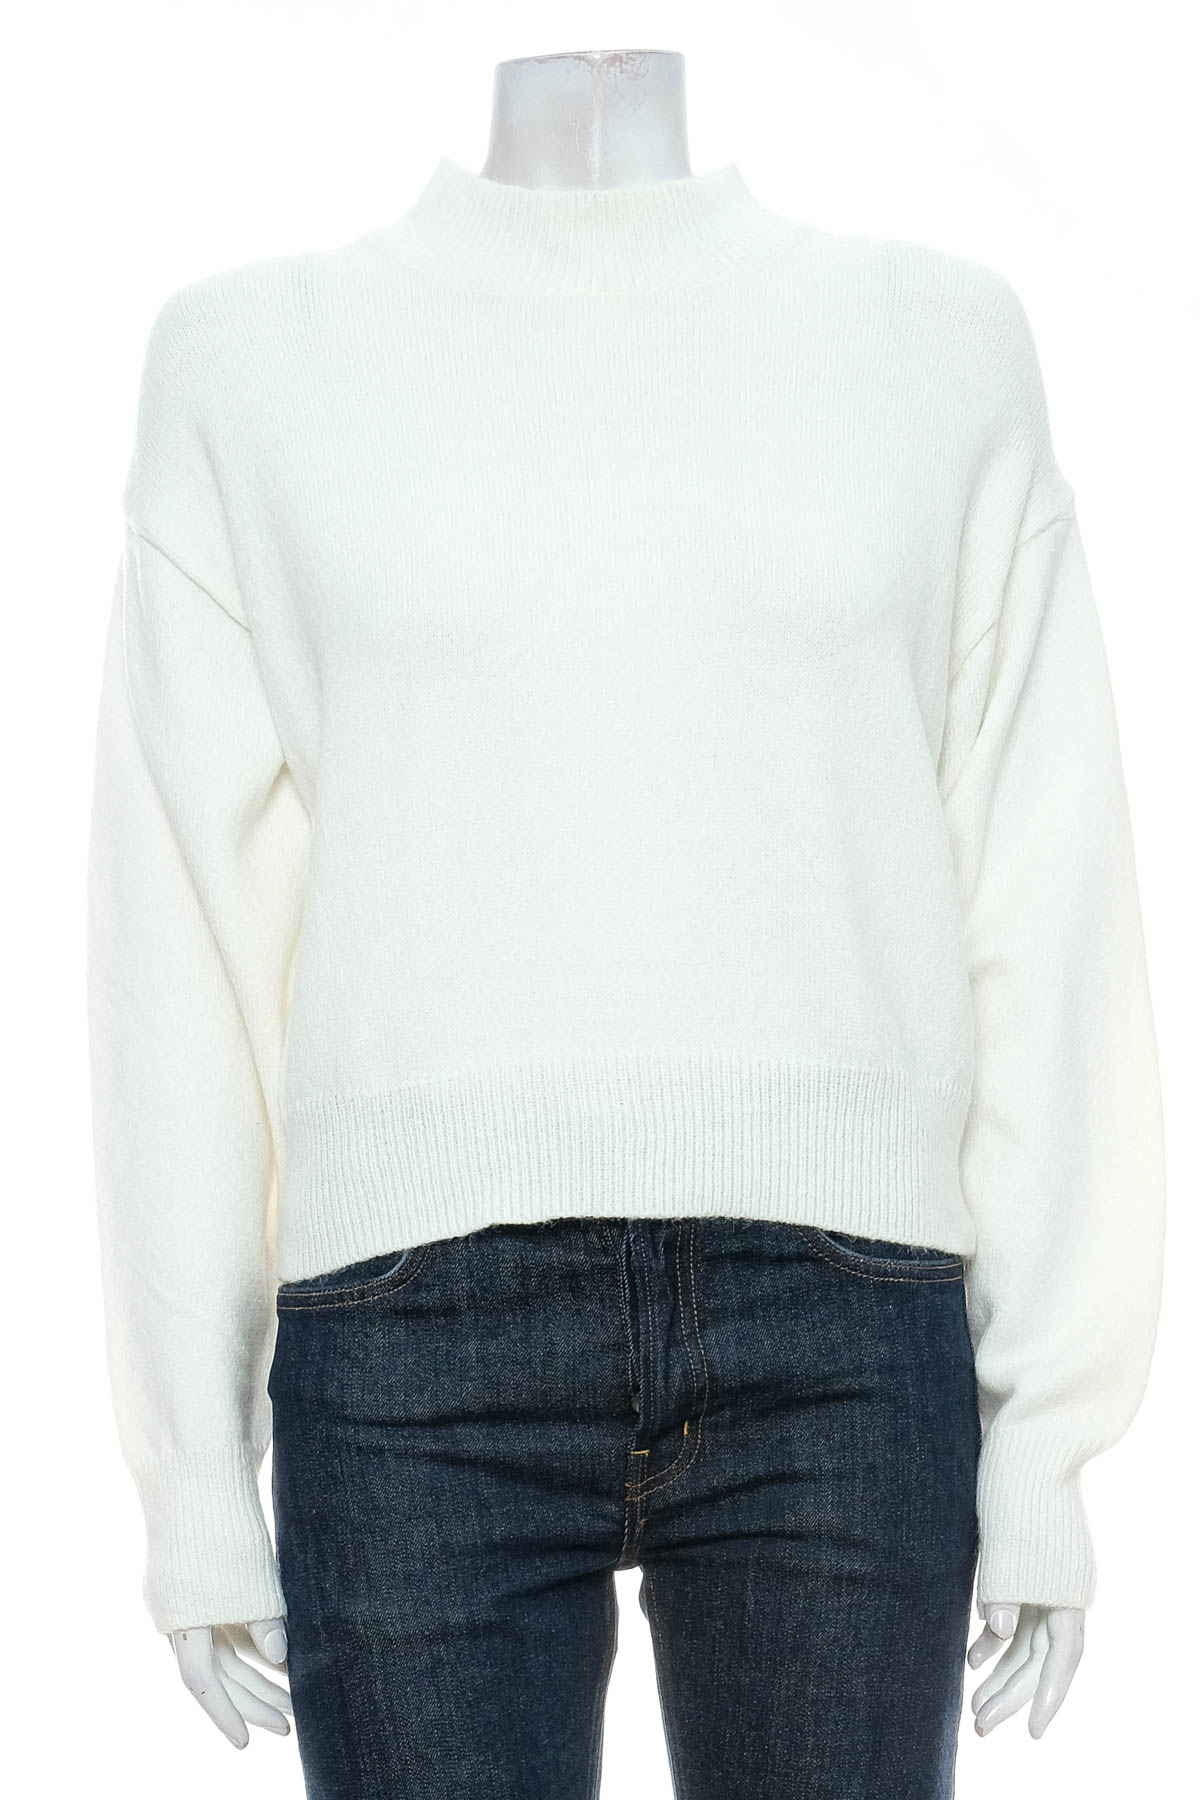 Women's sweater - Ebby and I - 0